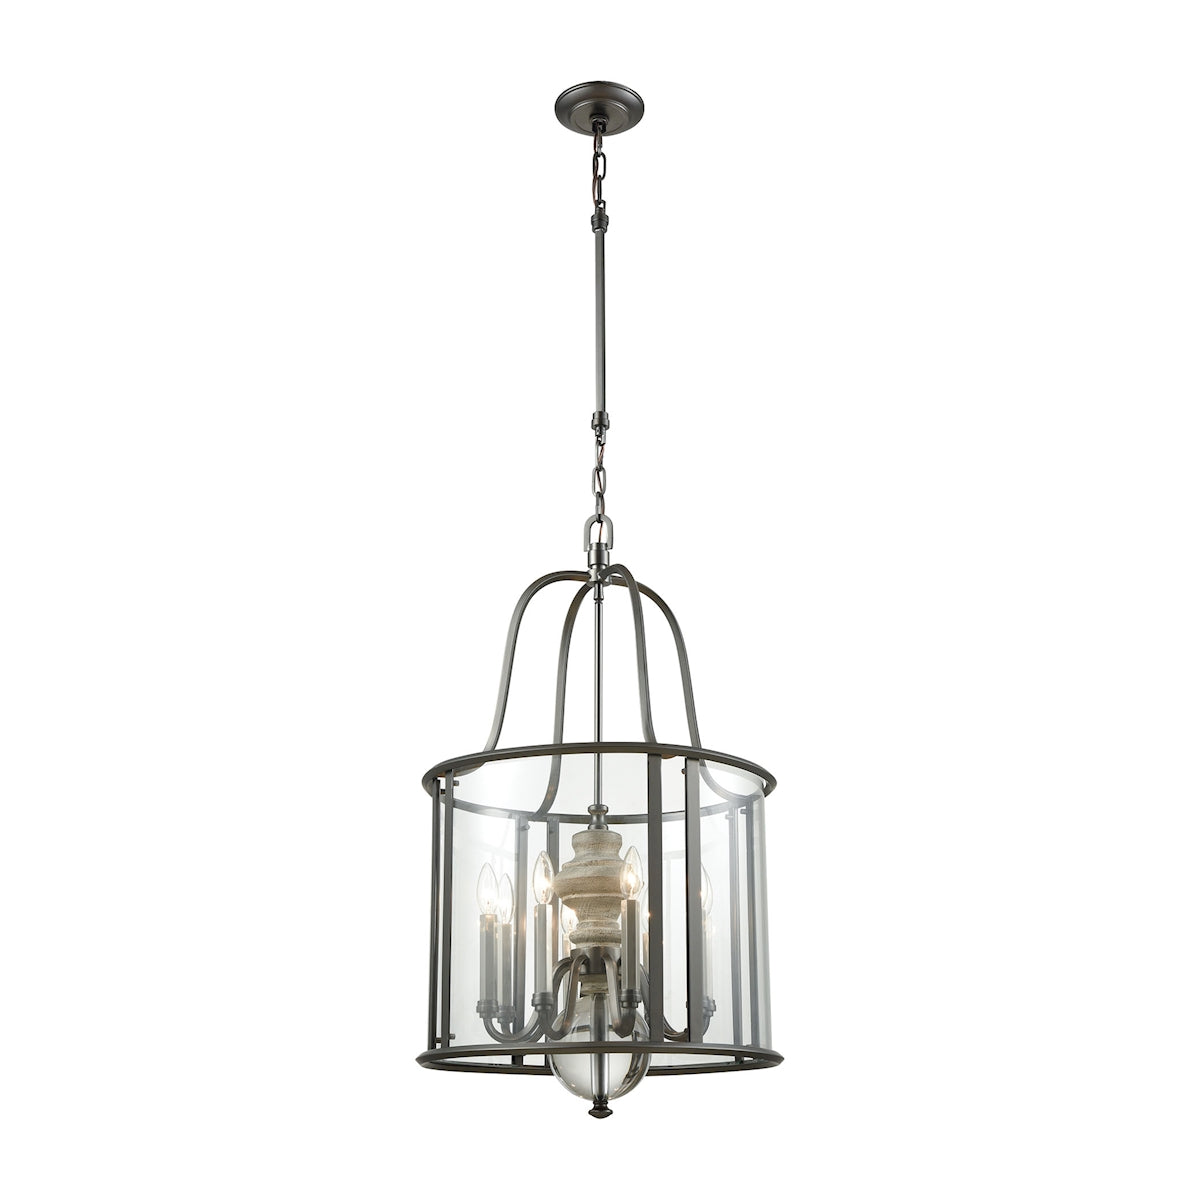 ELK Lighting 32312/8 Neo Classica 8-Light Chandelier in Aged Black Nickel with Weathered Birch and Clear Crystal